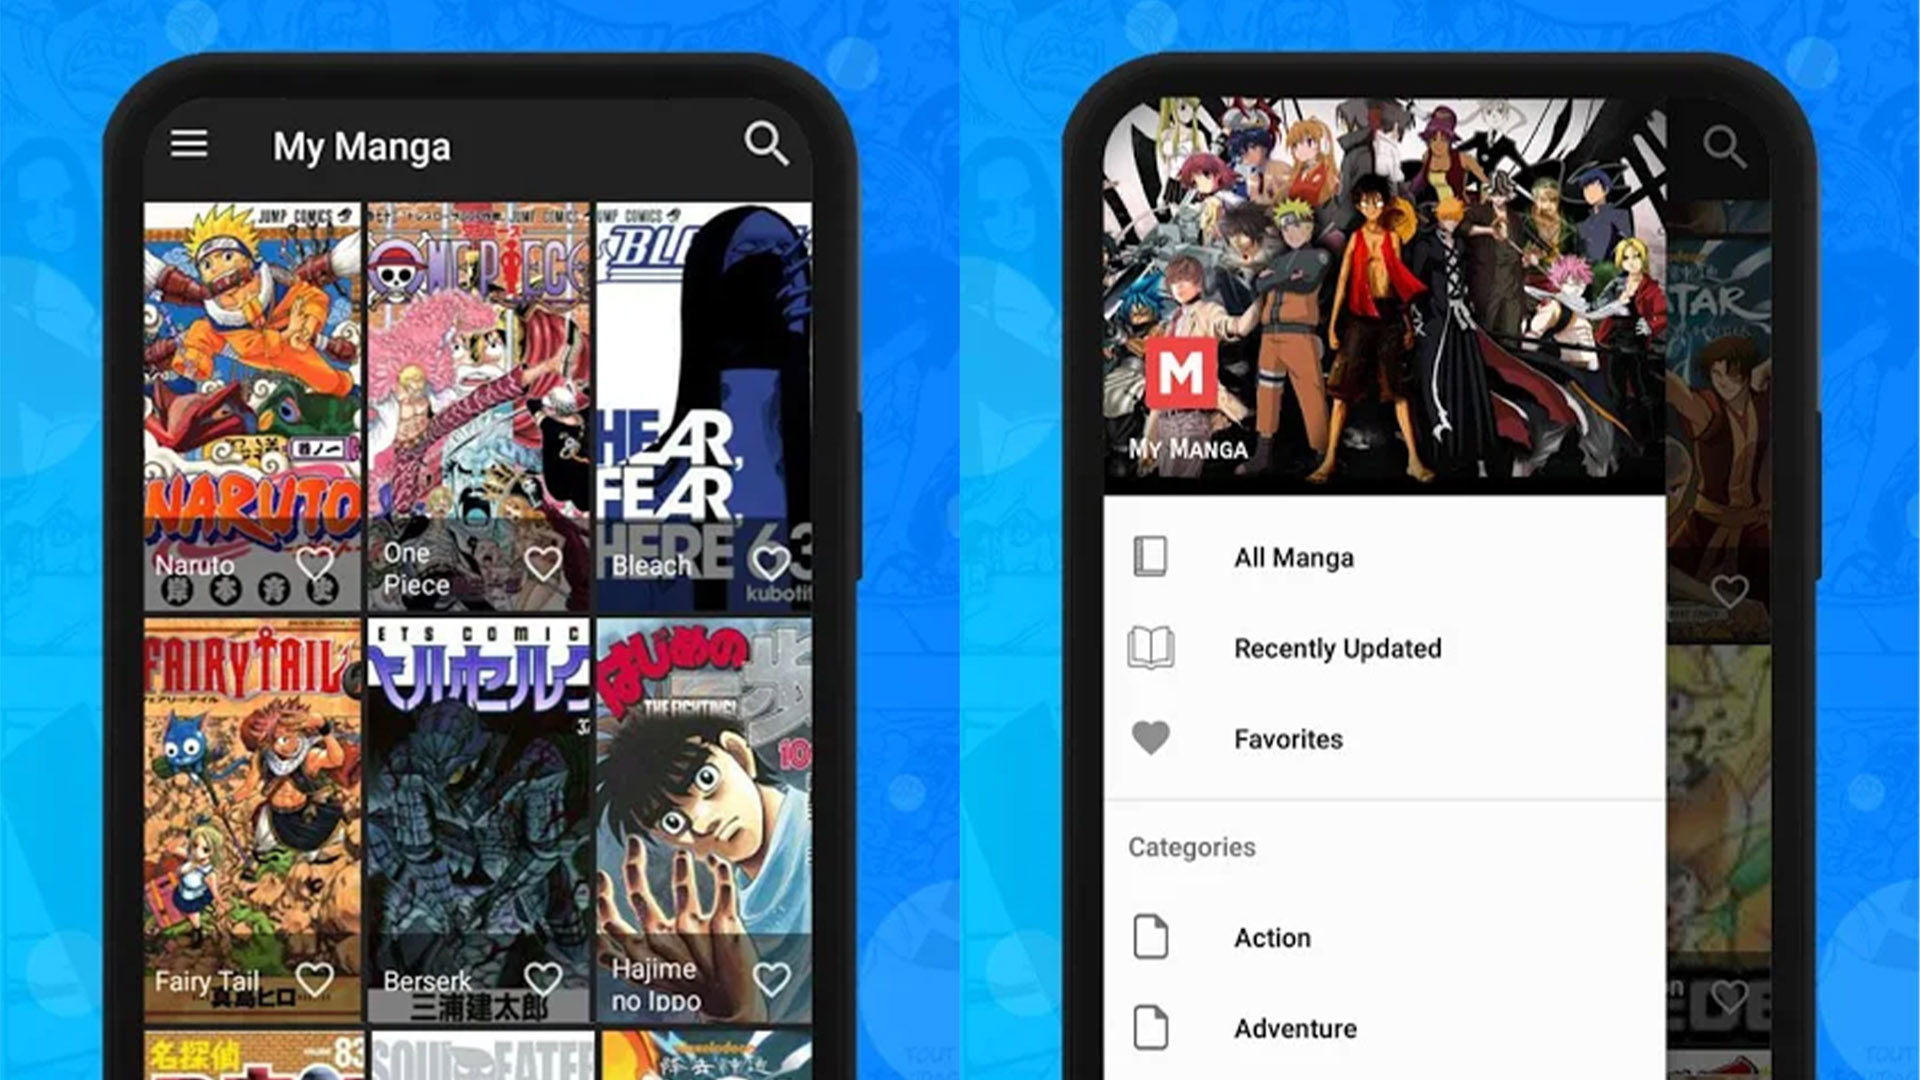 Download Tio Anime APK App For Android - Latest 2022 Version